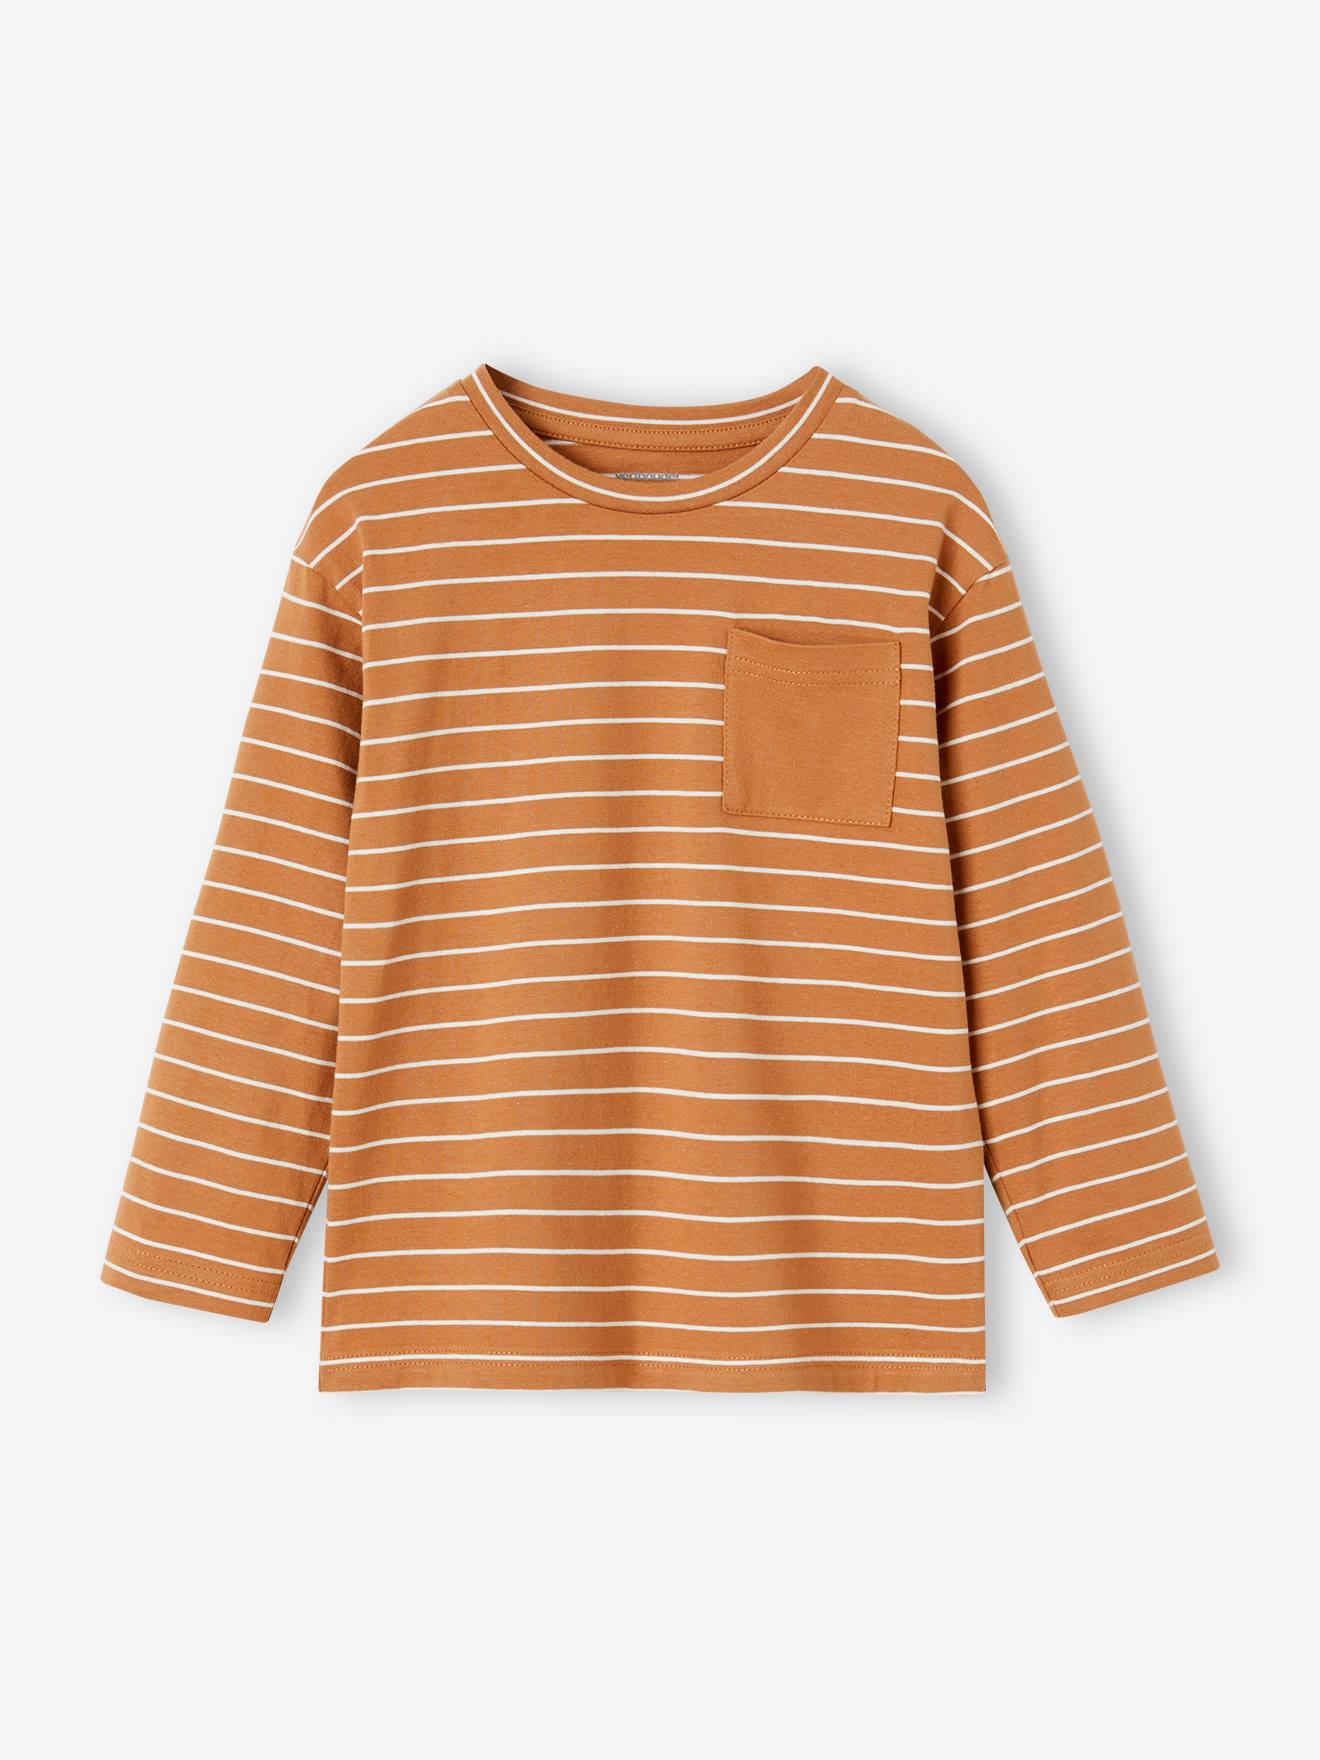 Striped T-Shirt for Boys pecan nut